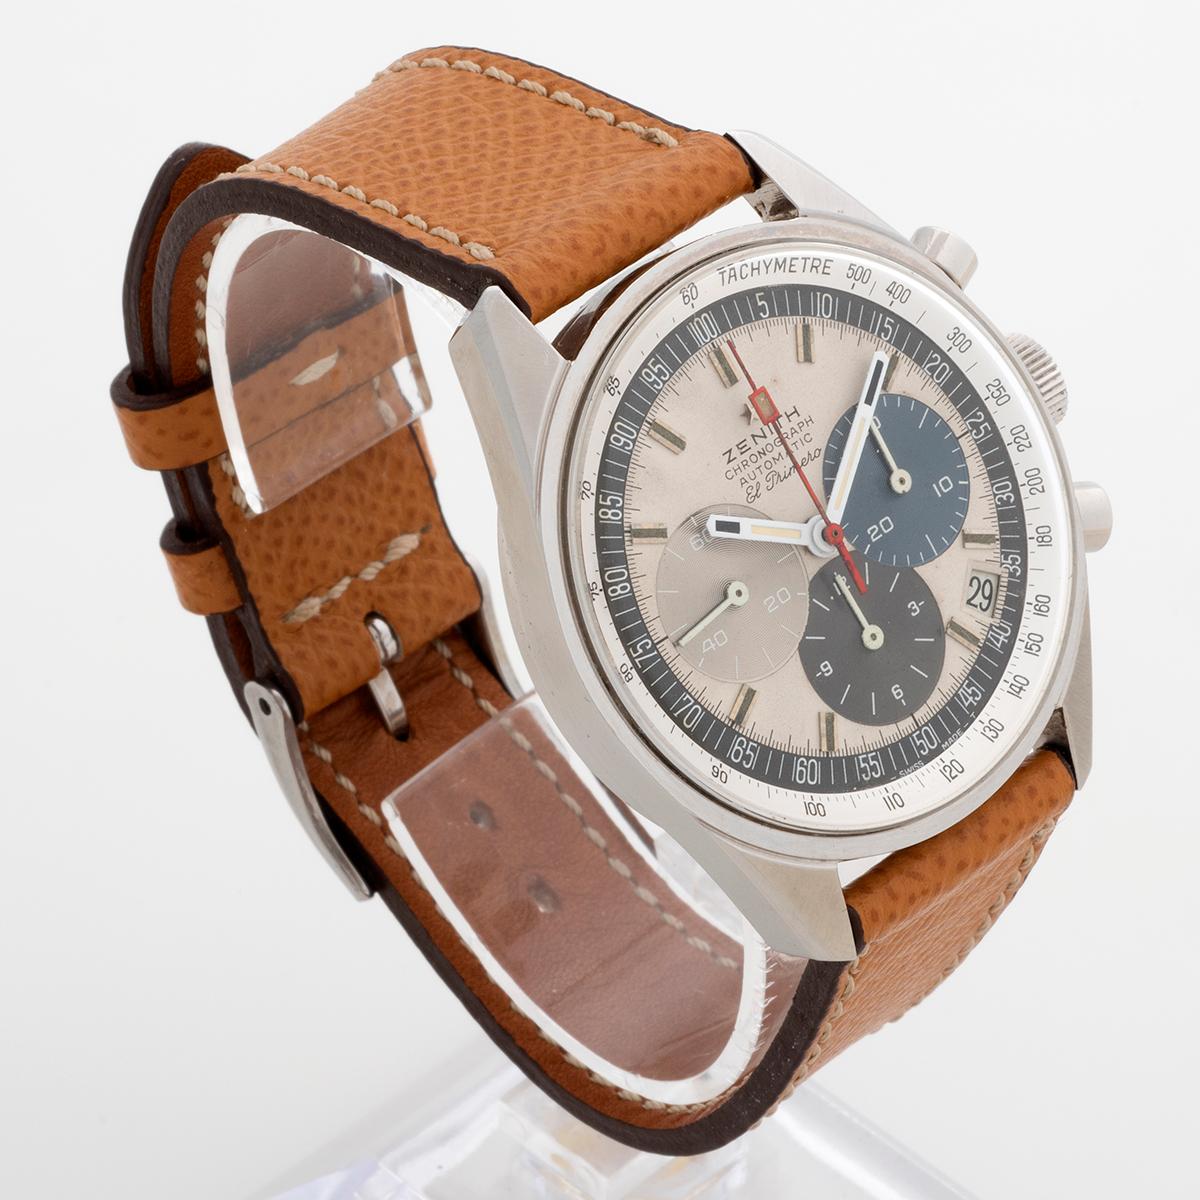 Our extremely rare vintage Zenith El Primero chronograph with date, reference A386 , features a 38mm stainless steel case with very desirable original and patinated dial and coeval hands ; this example of reference A386 also known as a mark 2. The